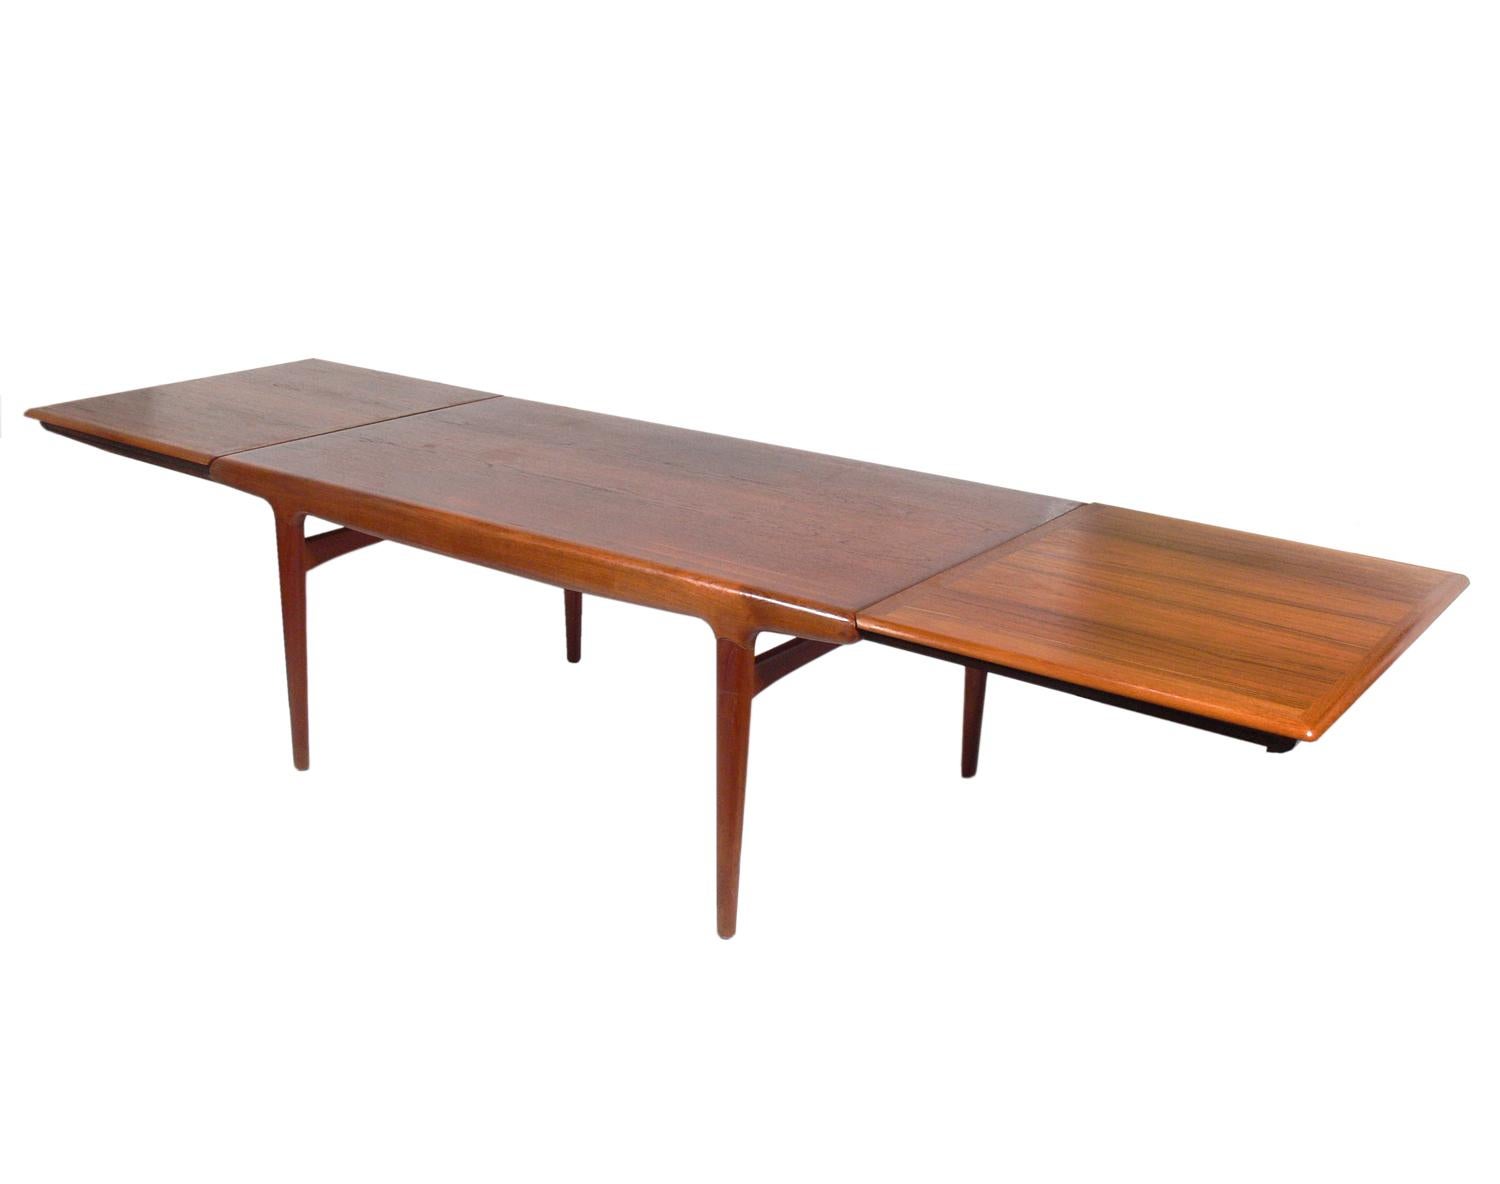 Danish Modern Dining Table in Beautifully Grained Teak, designed by Johannes Andersen, Denmark, circa 1960s. The table expands from 70